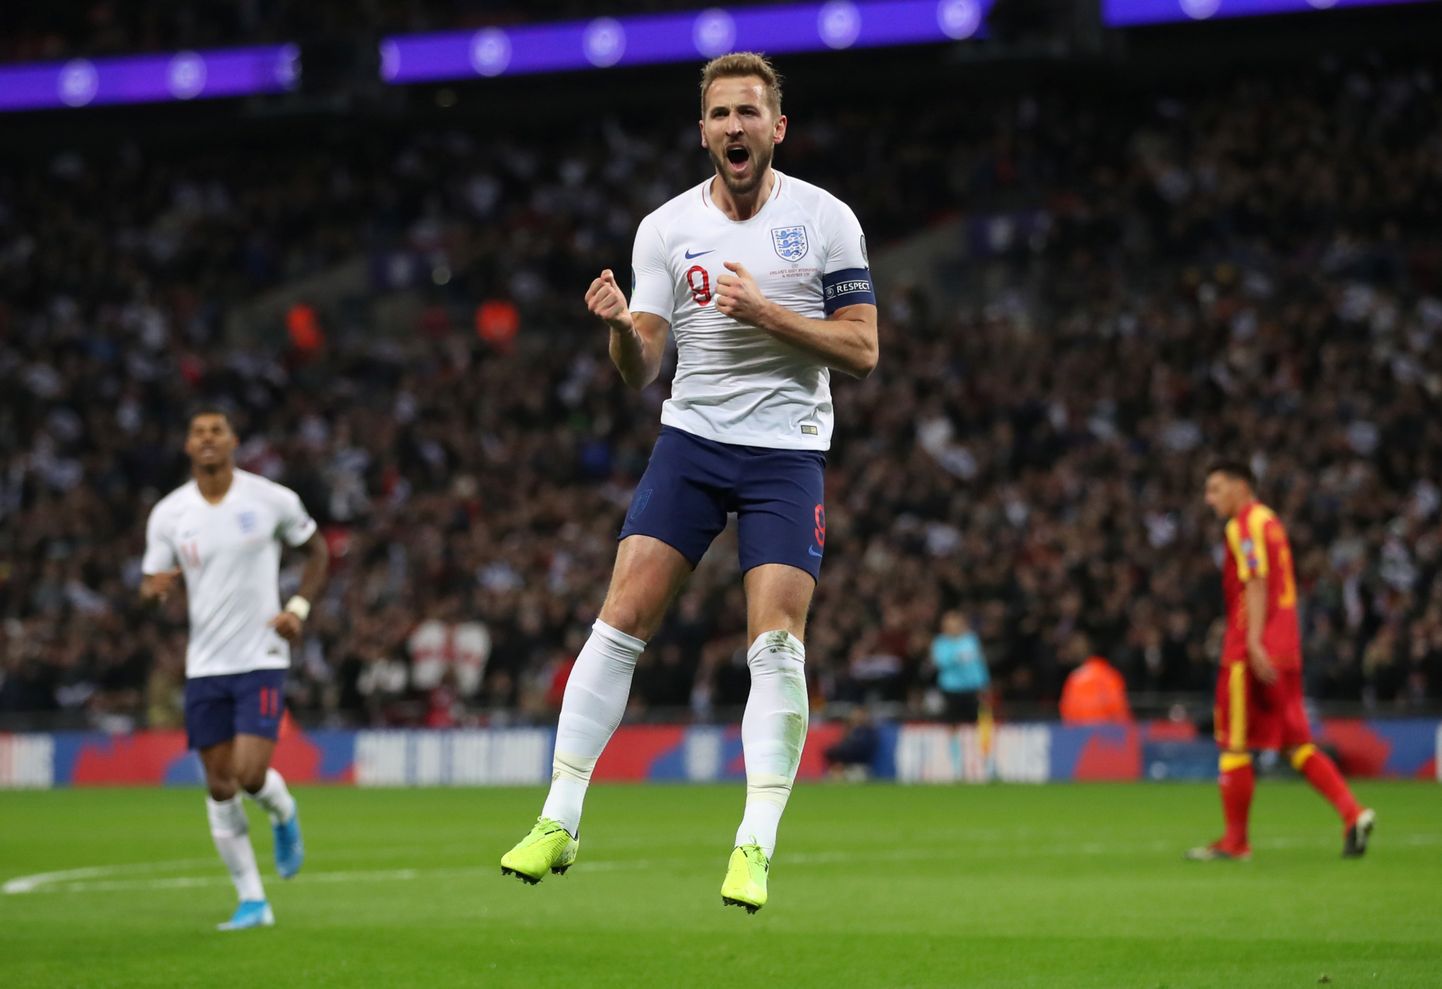 Soccer Football - Euro 2020 Qualifier - Group A - England v Montenegro - Wembley Stadium, London, Britain - November 14, 2019  England's Harry Kane celebrates scoring their second goal           Action Images via Reuters/Carl Recine     TPX IMAGES OF THE DAY